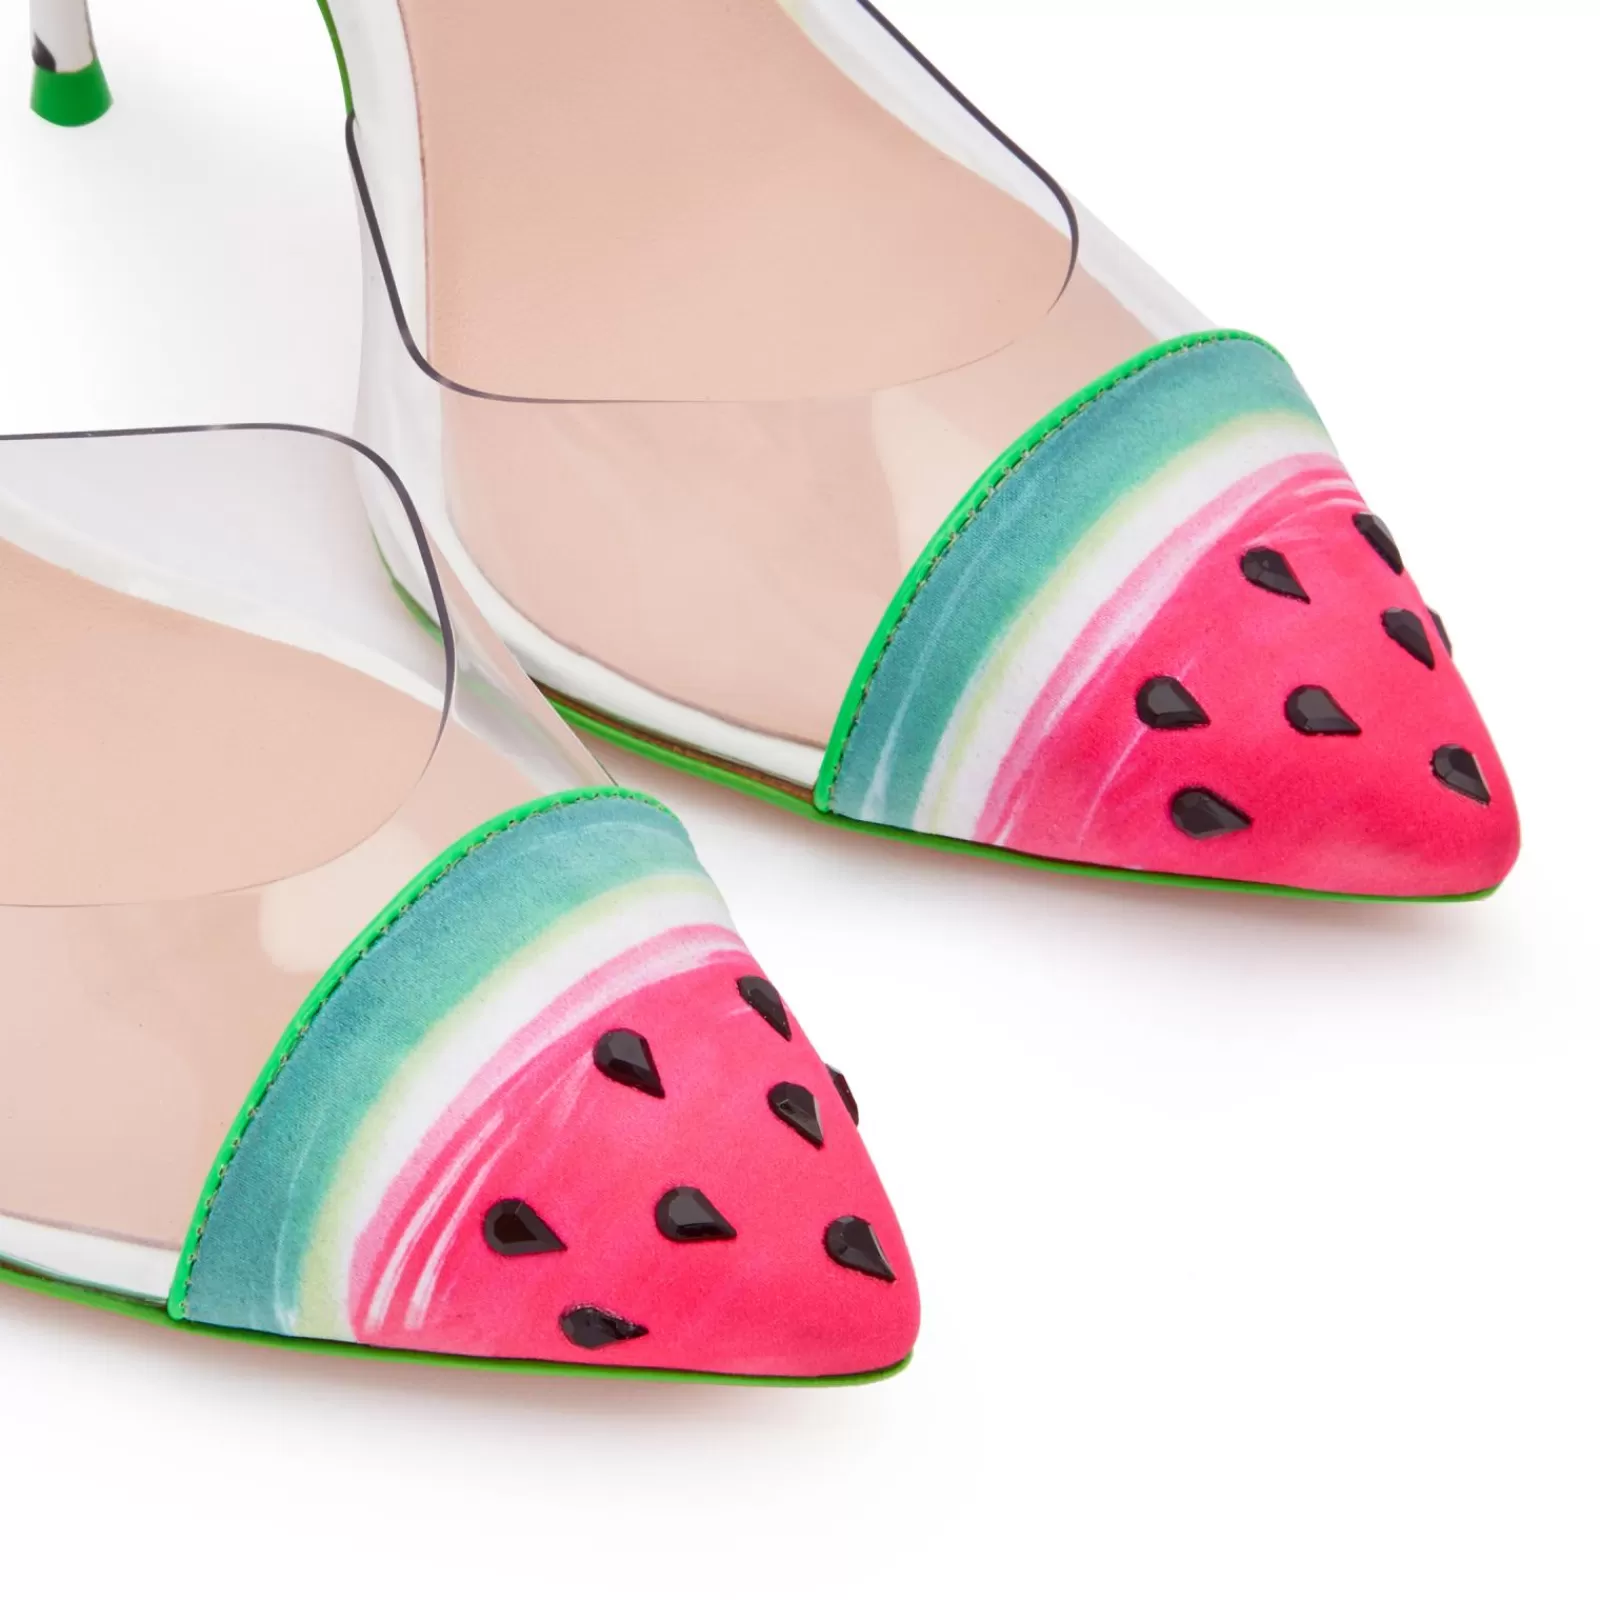 Sophia Webster Jessica Watermelon Pump^ UP TO SIZE 46 | PUMPS